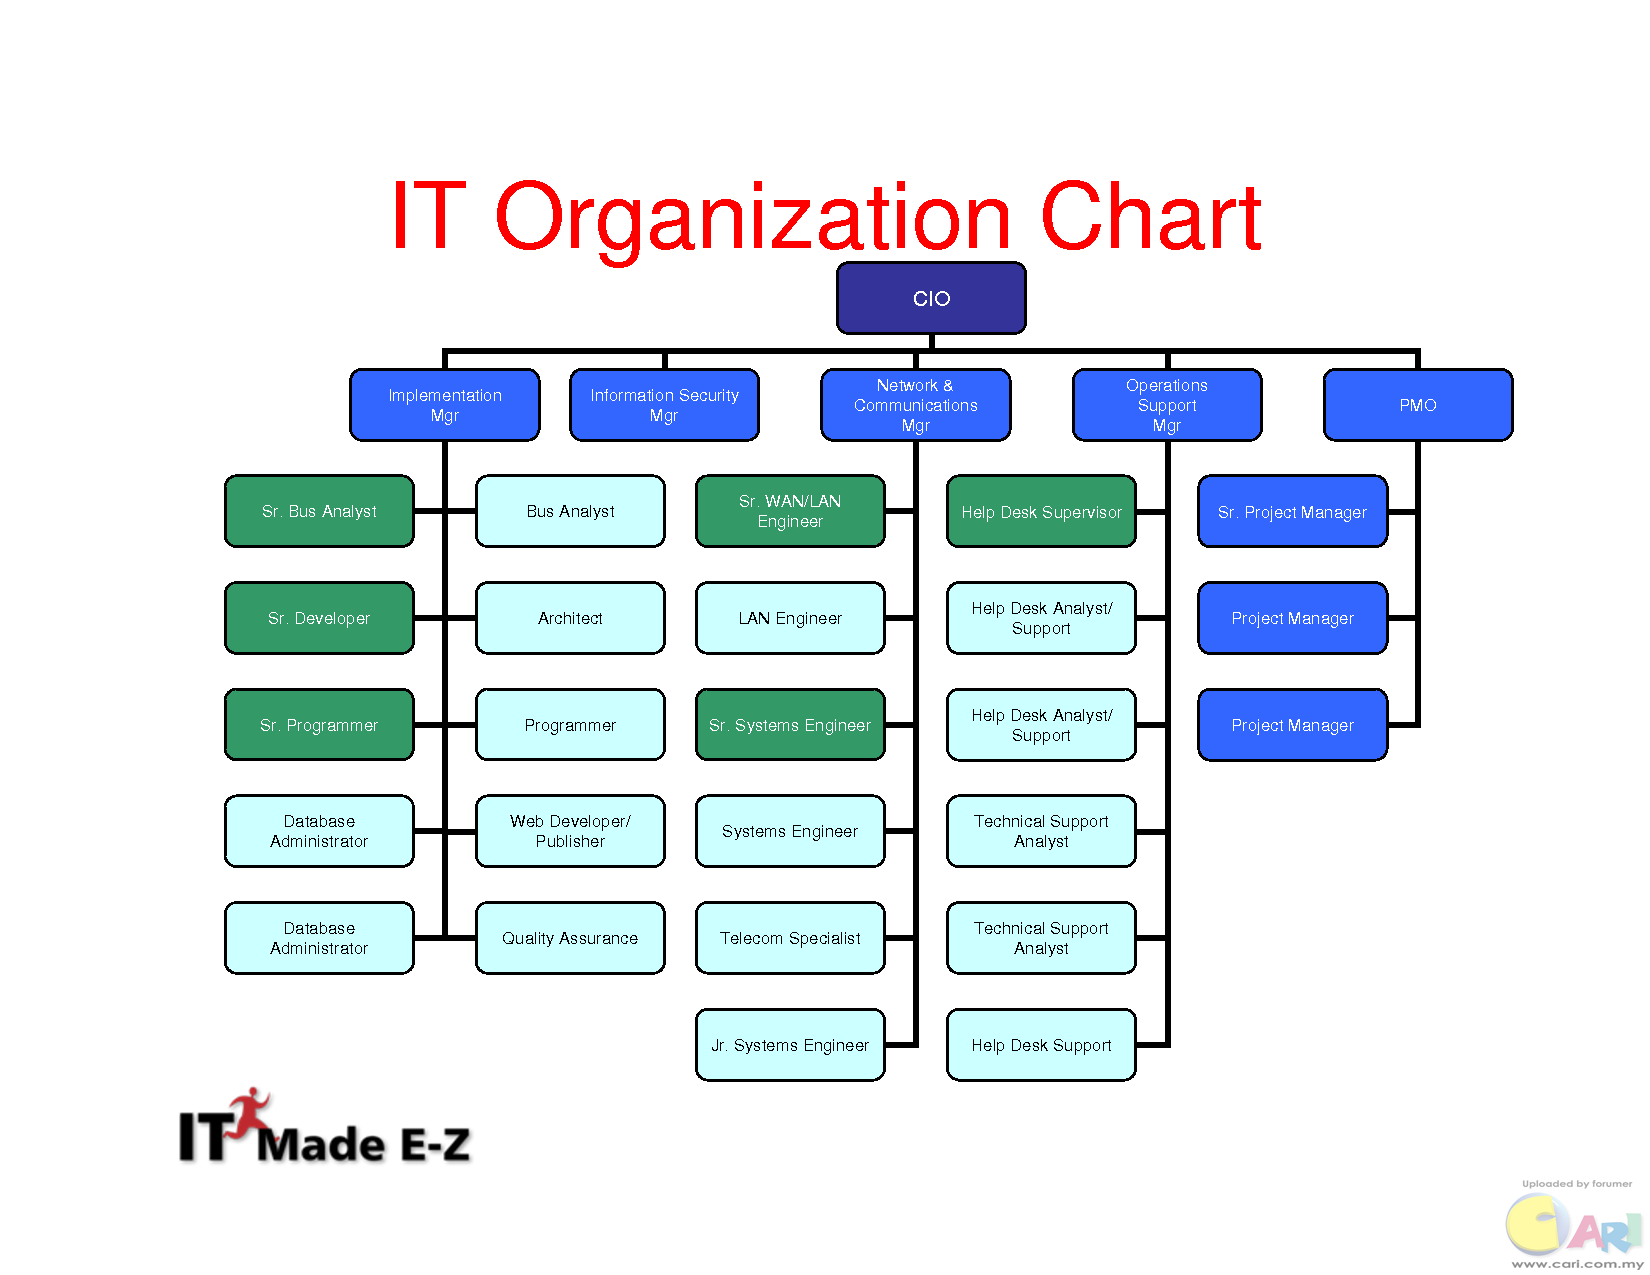 A chart showing. Организационная диаграмма. Организационный чарт. Organizational Chart пример. It Department structure.